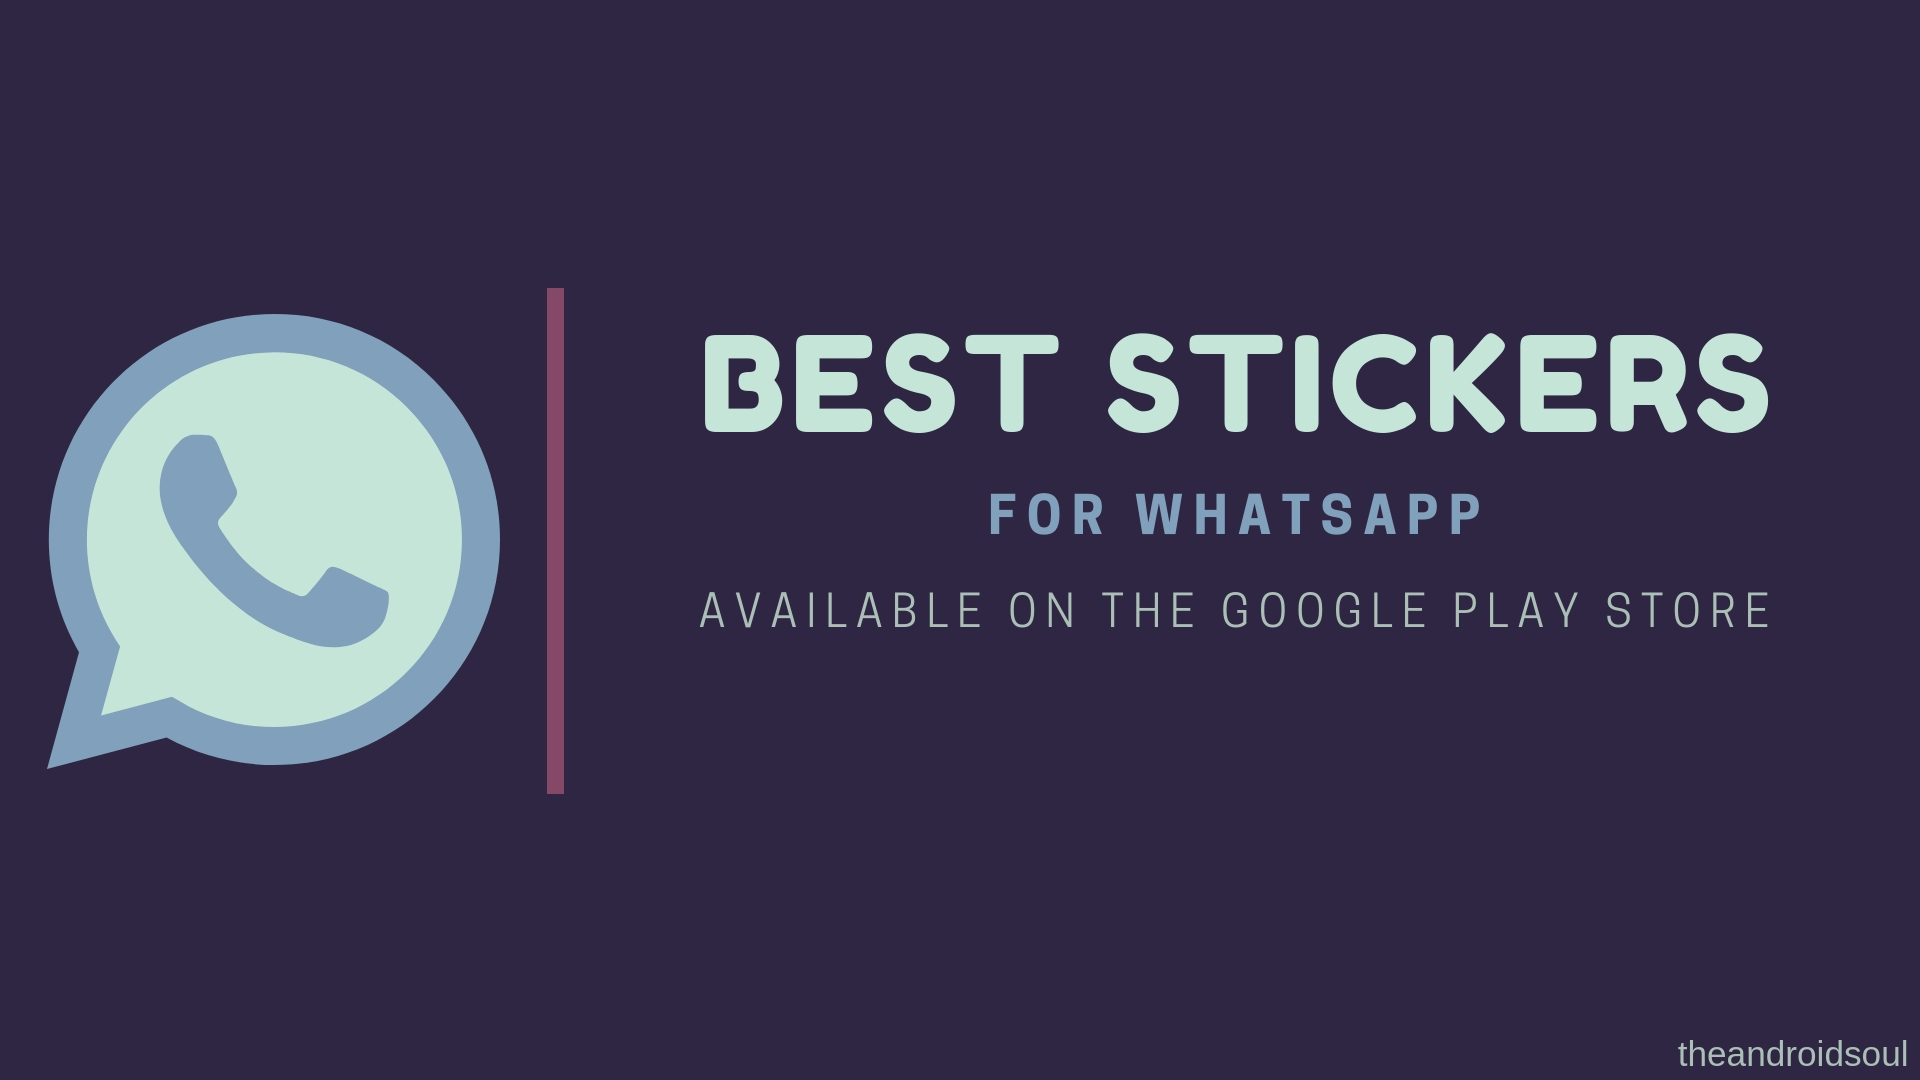 Top 51 Whatsapp Stickers You Should Use Download Personal Stickers Added